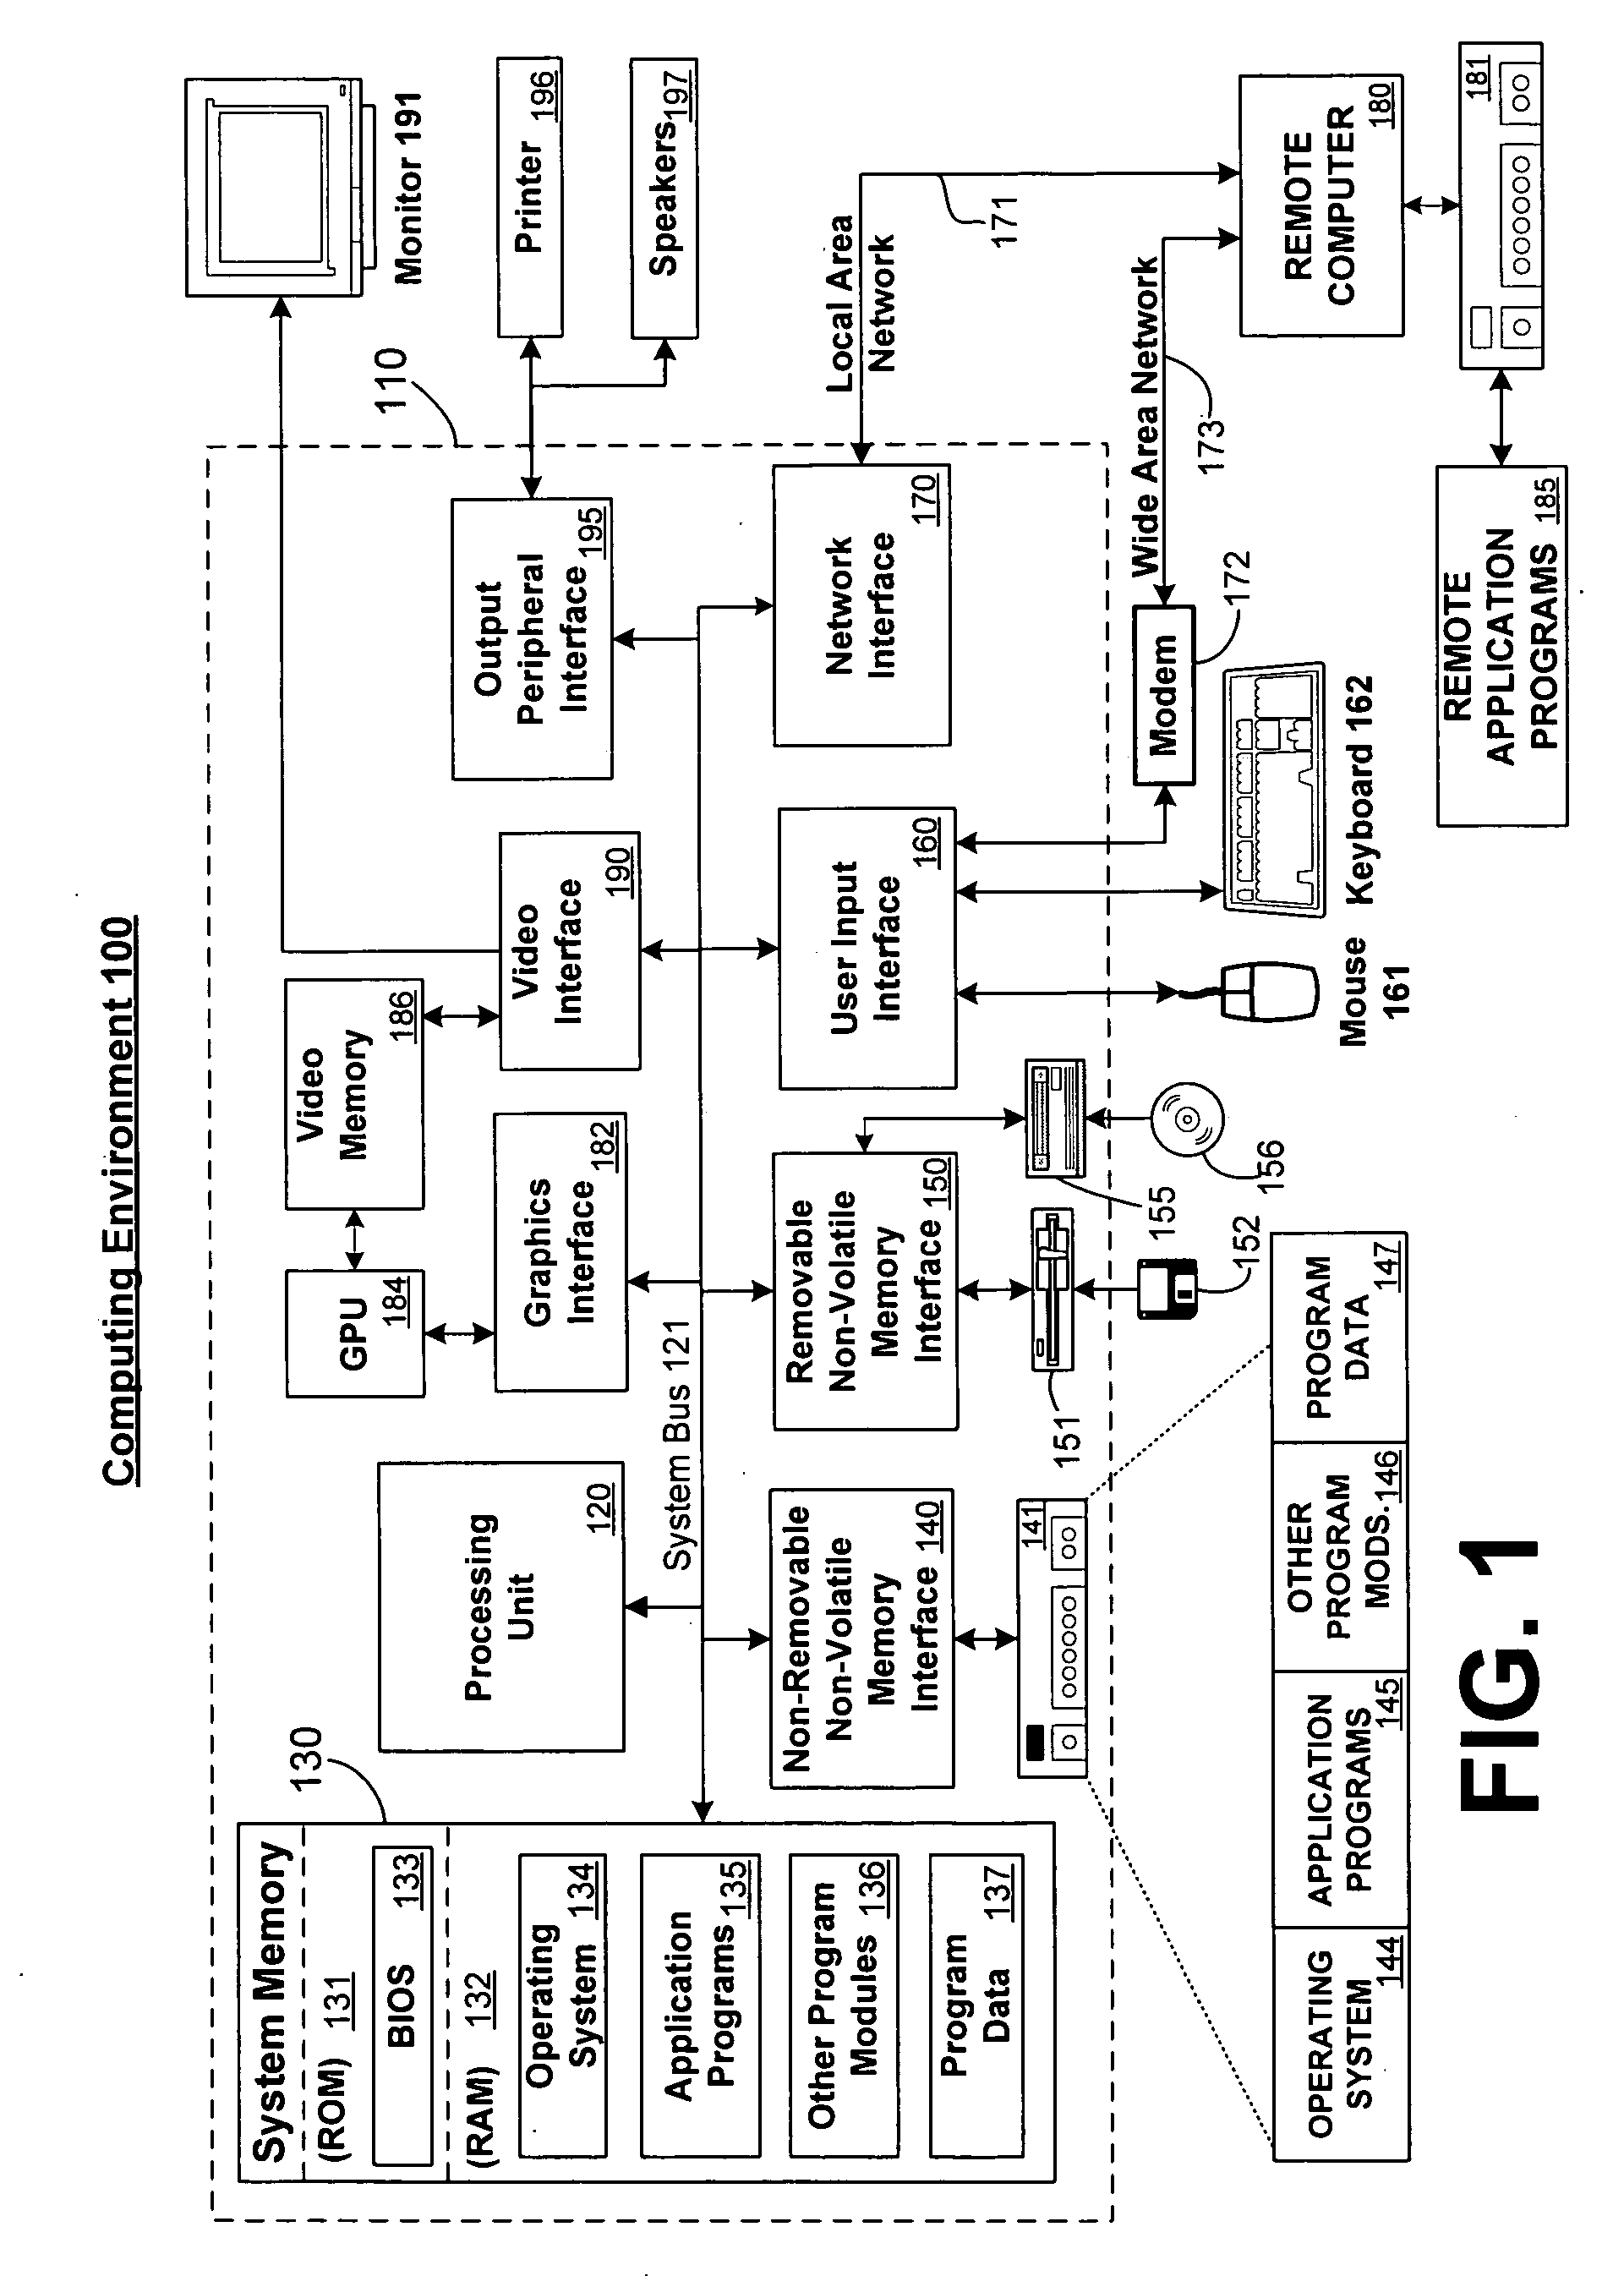 Managing working set in an extensible message transfer system